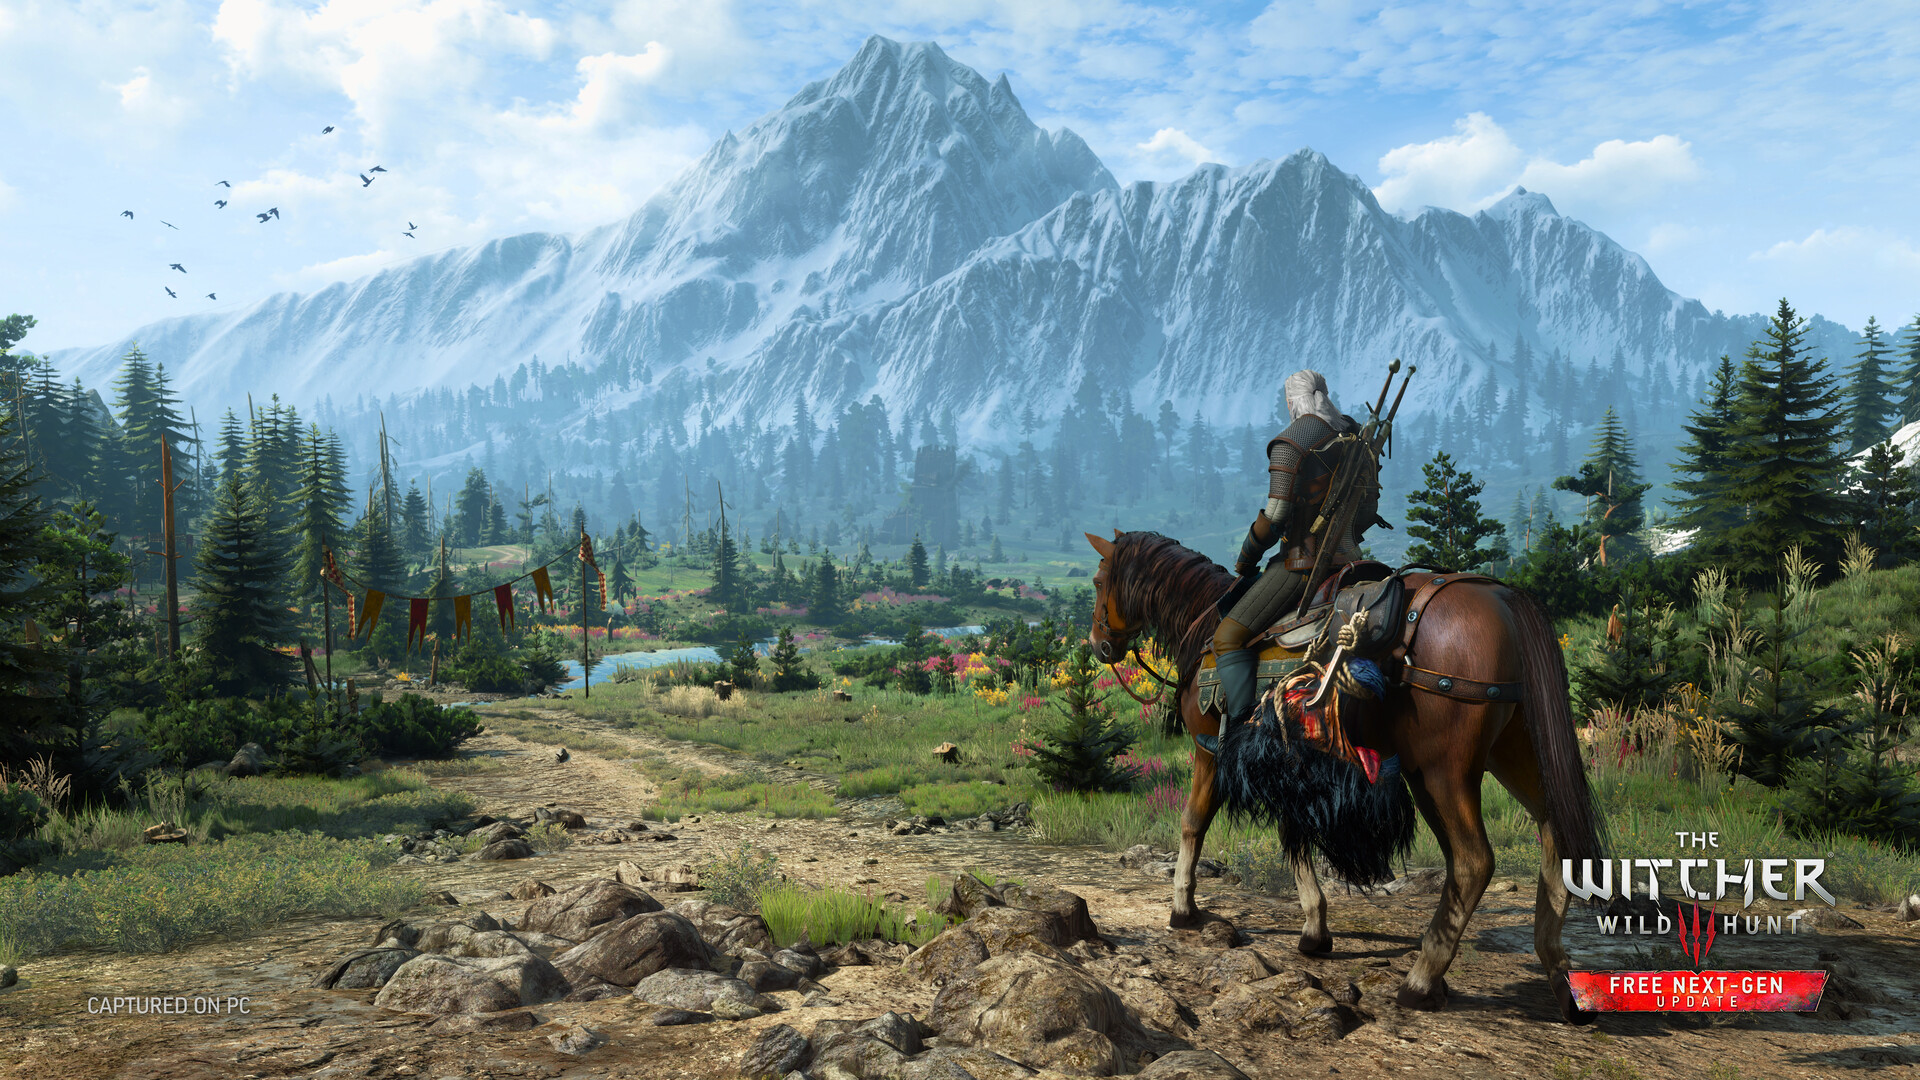 The Witcher 3 Wild Hunt Pc Requisitos - Colaboratory